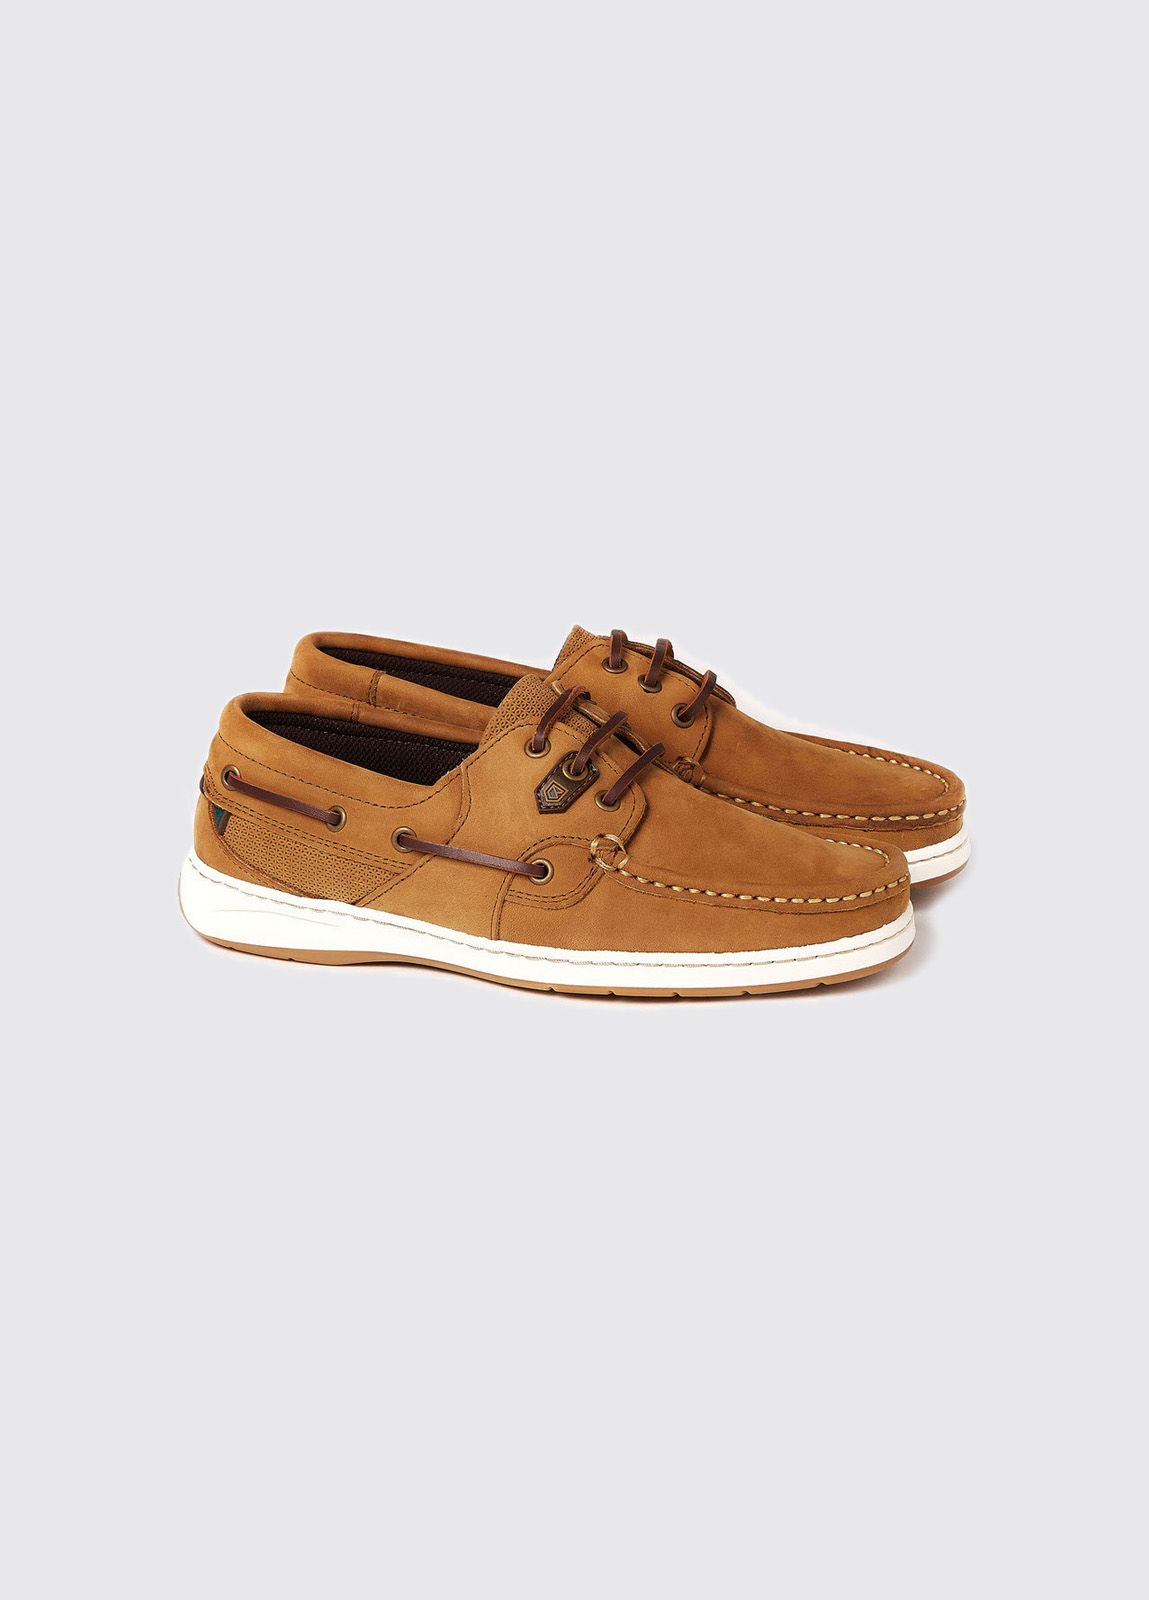 Auckland Loafer - Brown